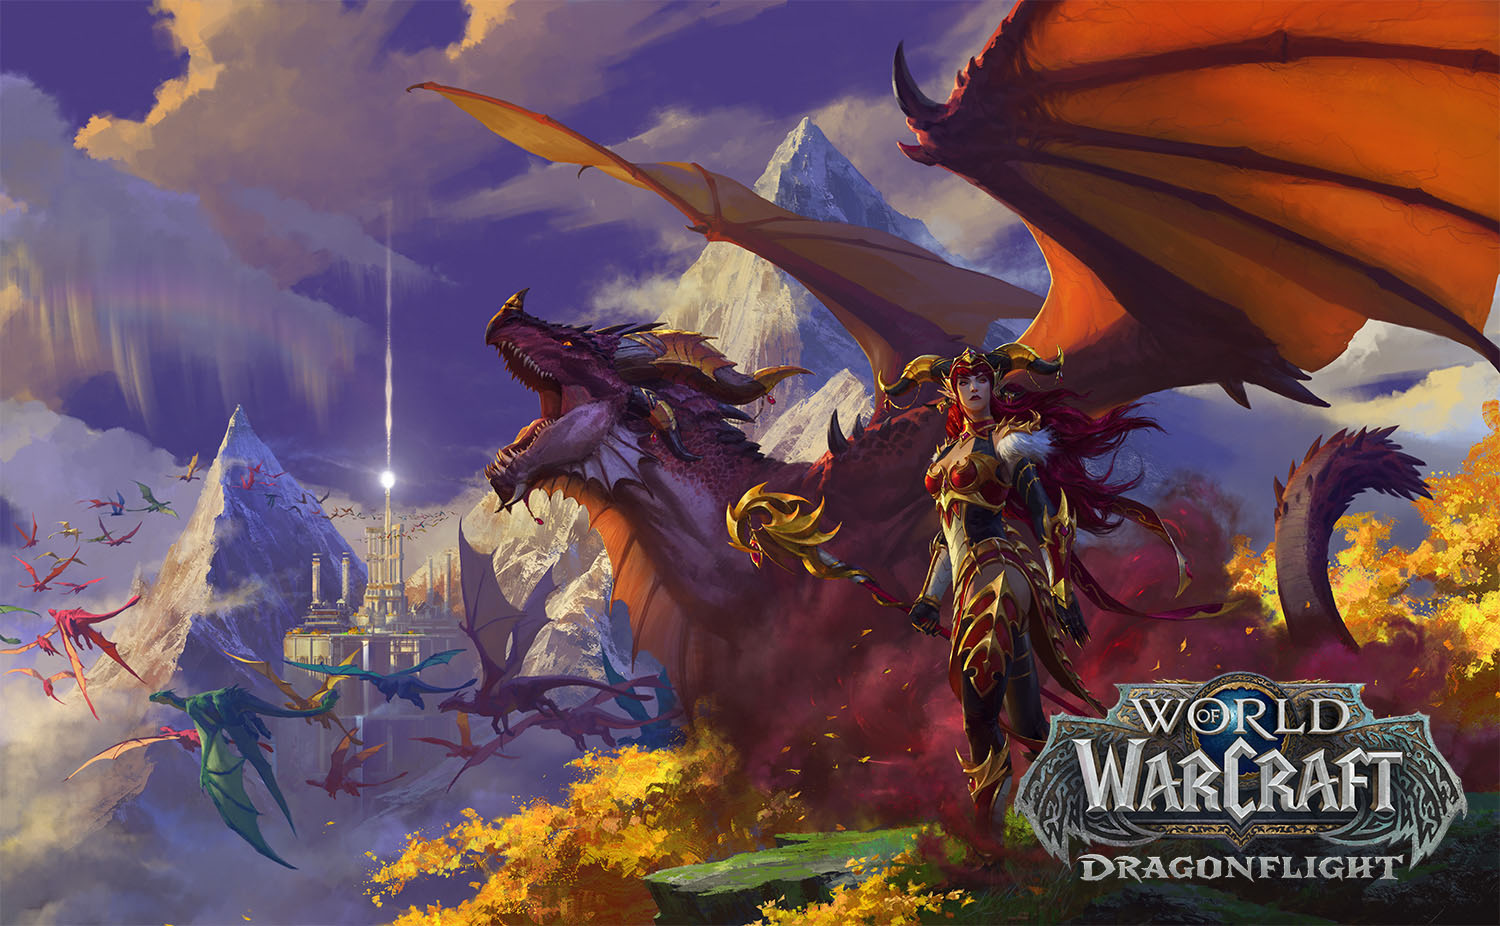 World of Warcraft: Dragonflight launches November 28